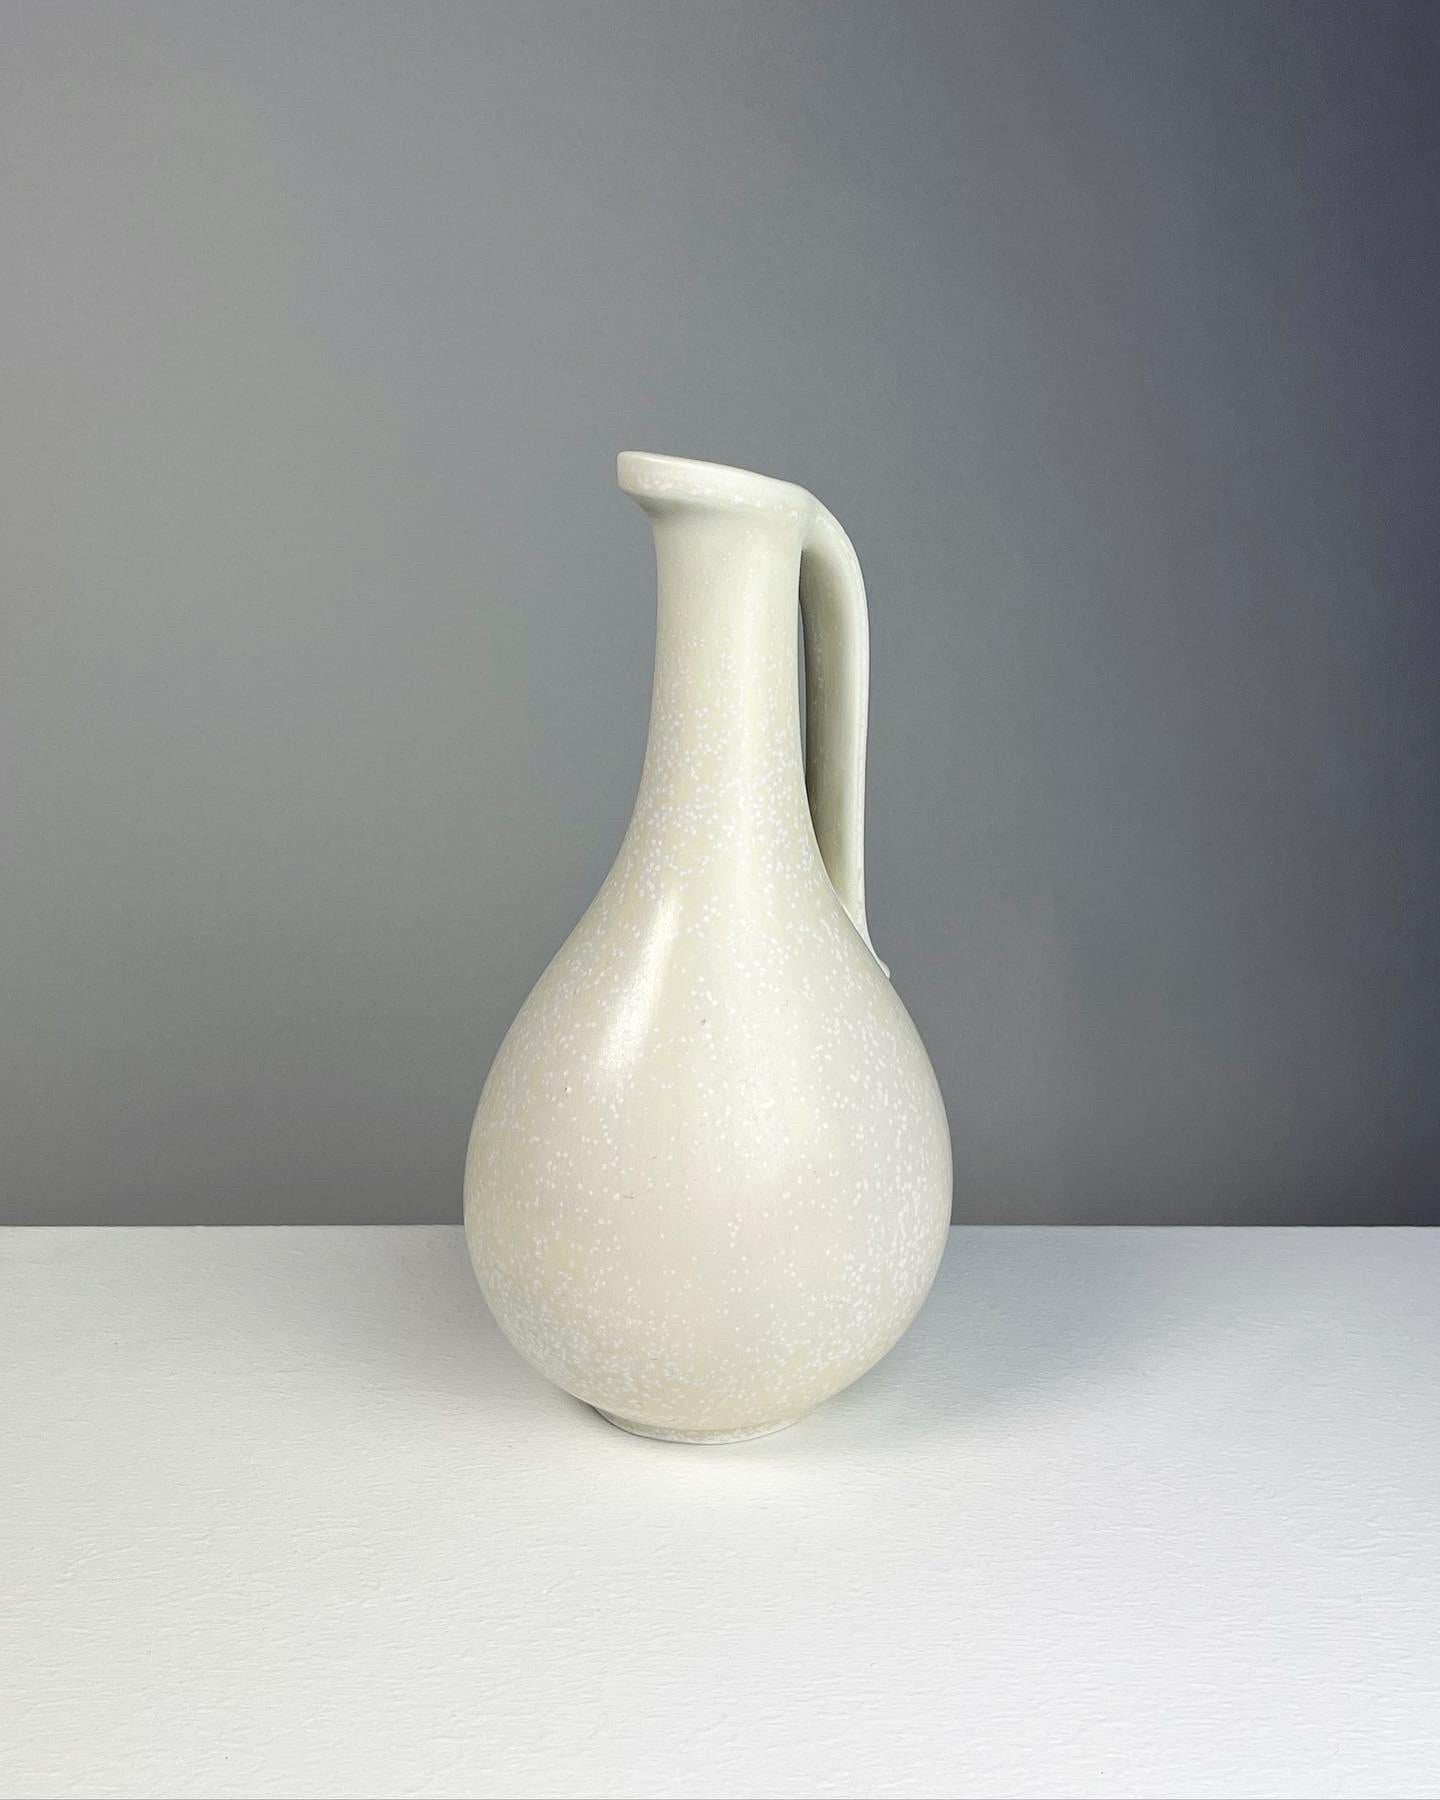 Beautiful stoneware pitcher vase by Gunnar Nylund, model No. 250 for Rörstrand in Sweden, 1950s.

Hand-thrown stoneware with a beautiful eggshell mimosa glaze. Signed underneath with the creators initials. 

Height: 24.5 cm
Diameter: 13 cm.